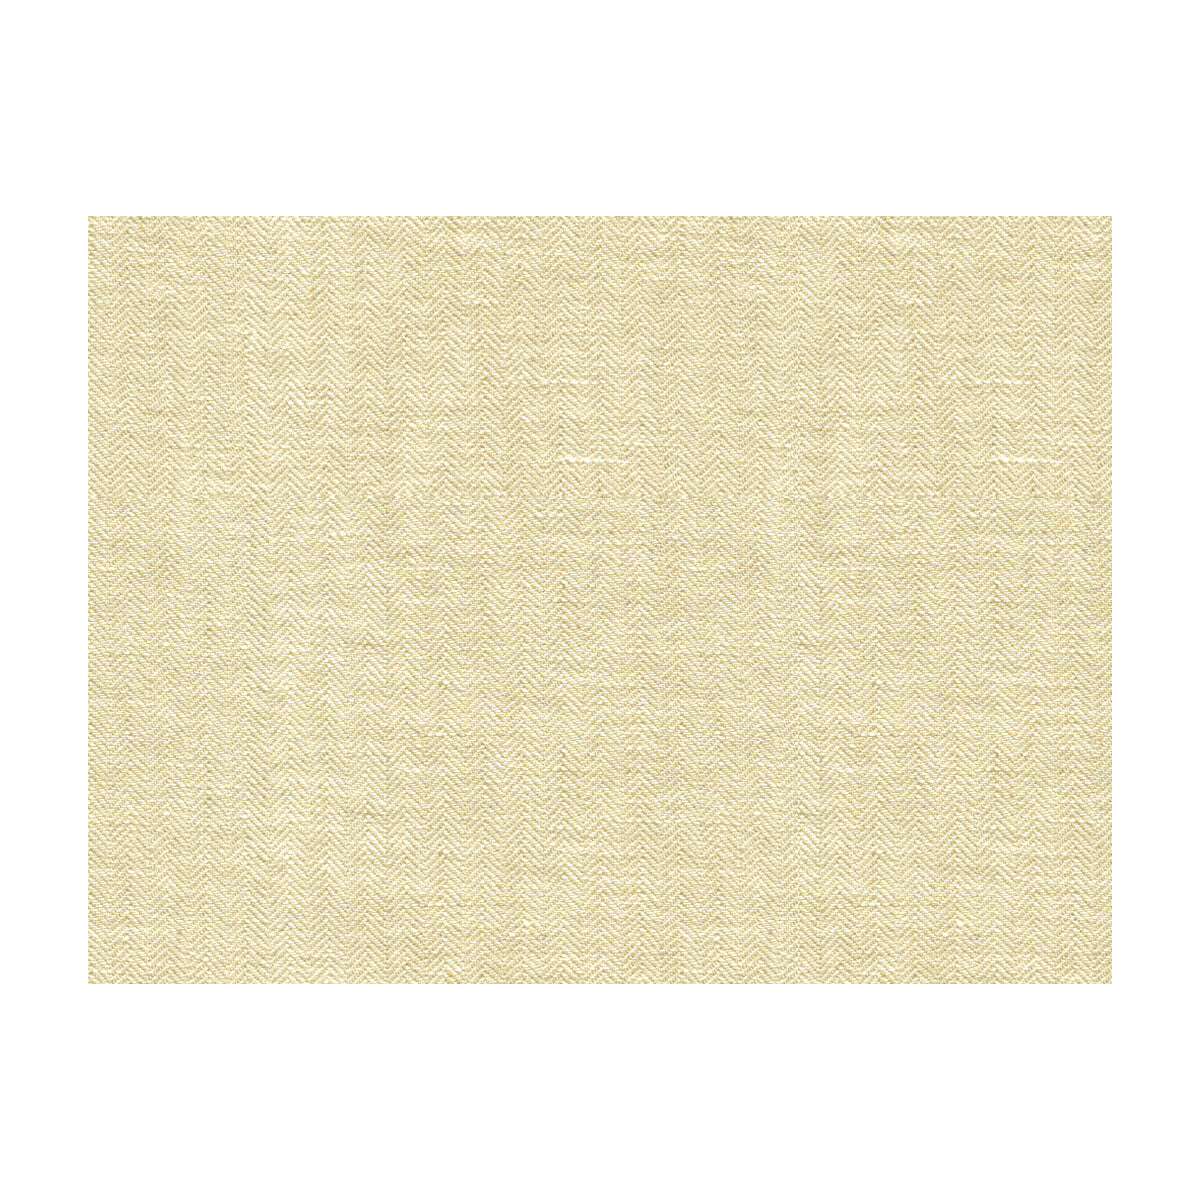 Kravet Basics fabric in 33770-16 color - pattern 33770.16.0 - by Kravet Basics in the Perfect Plains collection